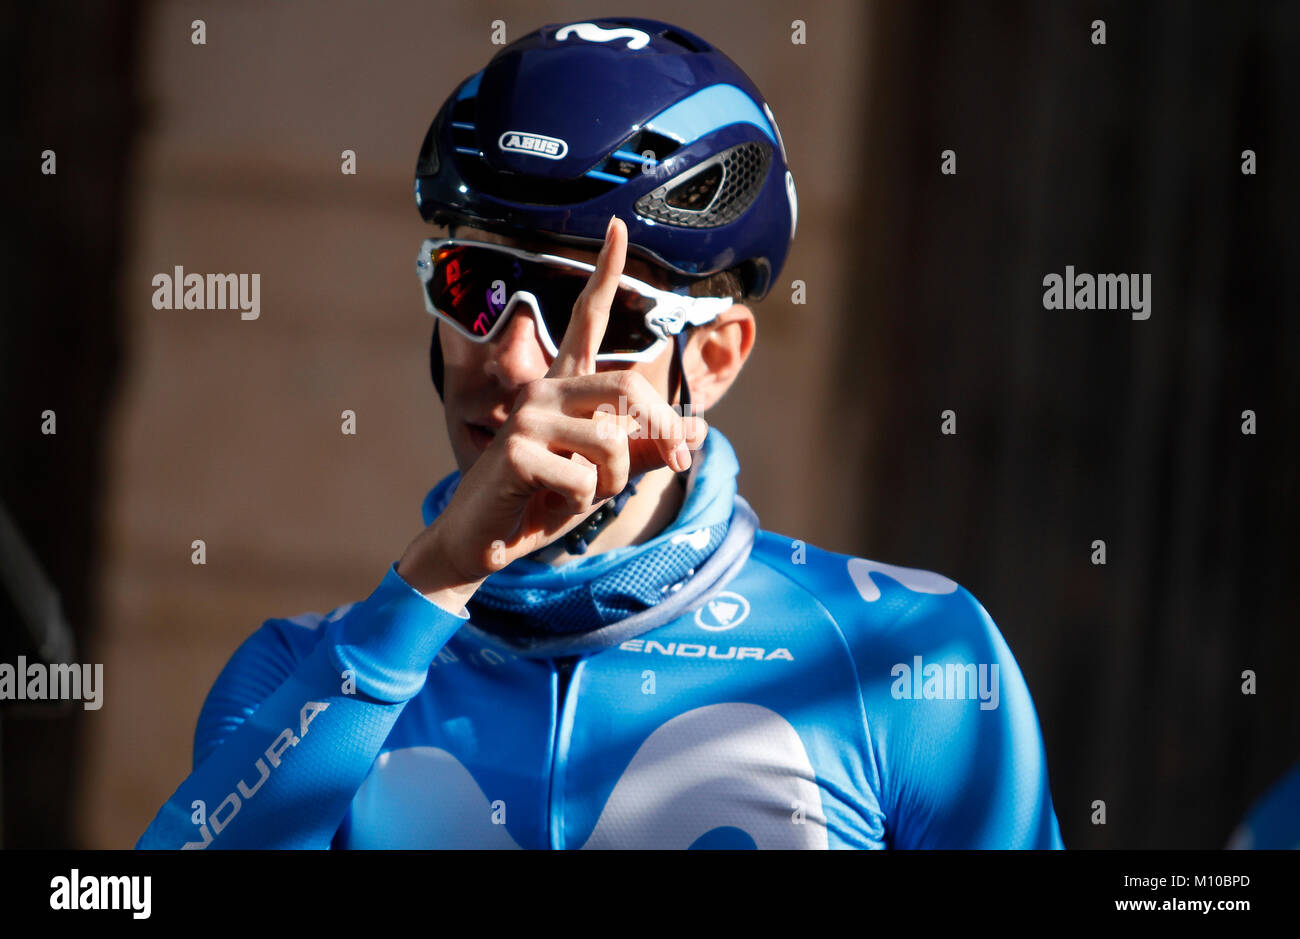 Mallorca, Spain. 25th Jan, 2018. The Spanish cyclist Moviestar team rider CARLOS BARBERO gestures before the Mallorca Challenge first stage in the village of Campos in Mallorca, Spain. Mafalda/Alamy Live News Stock Photo